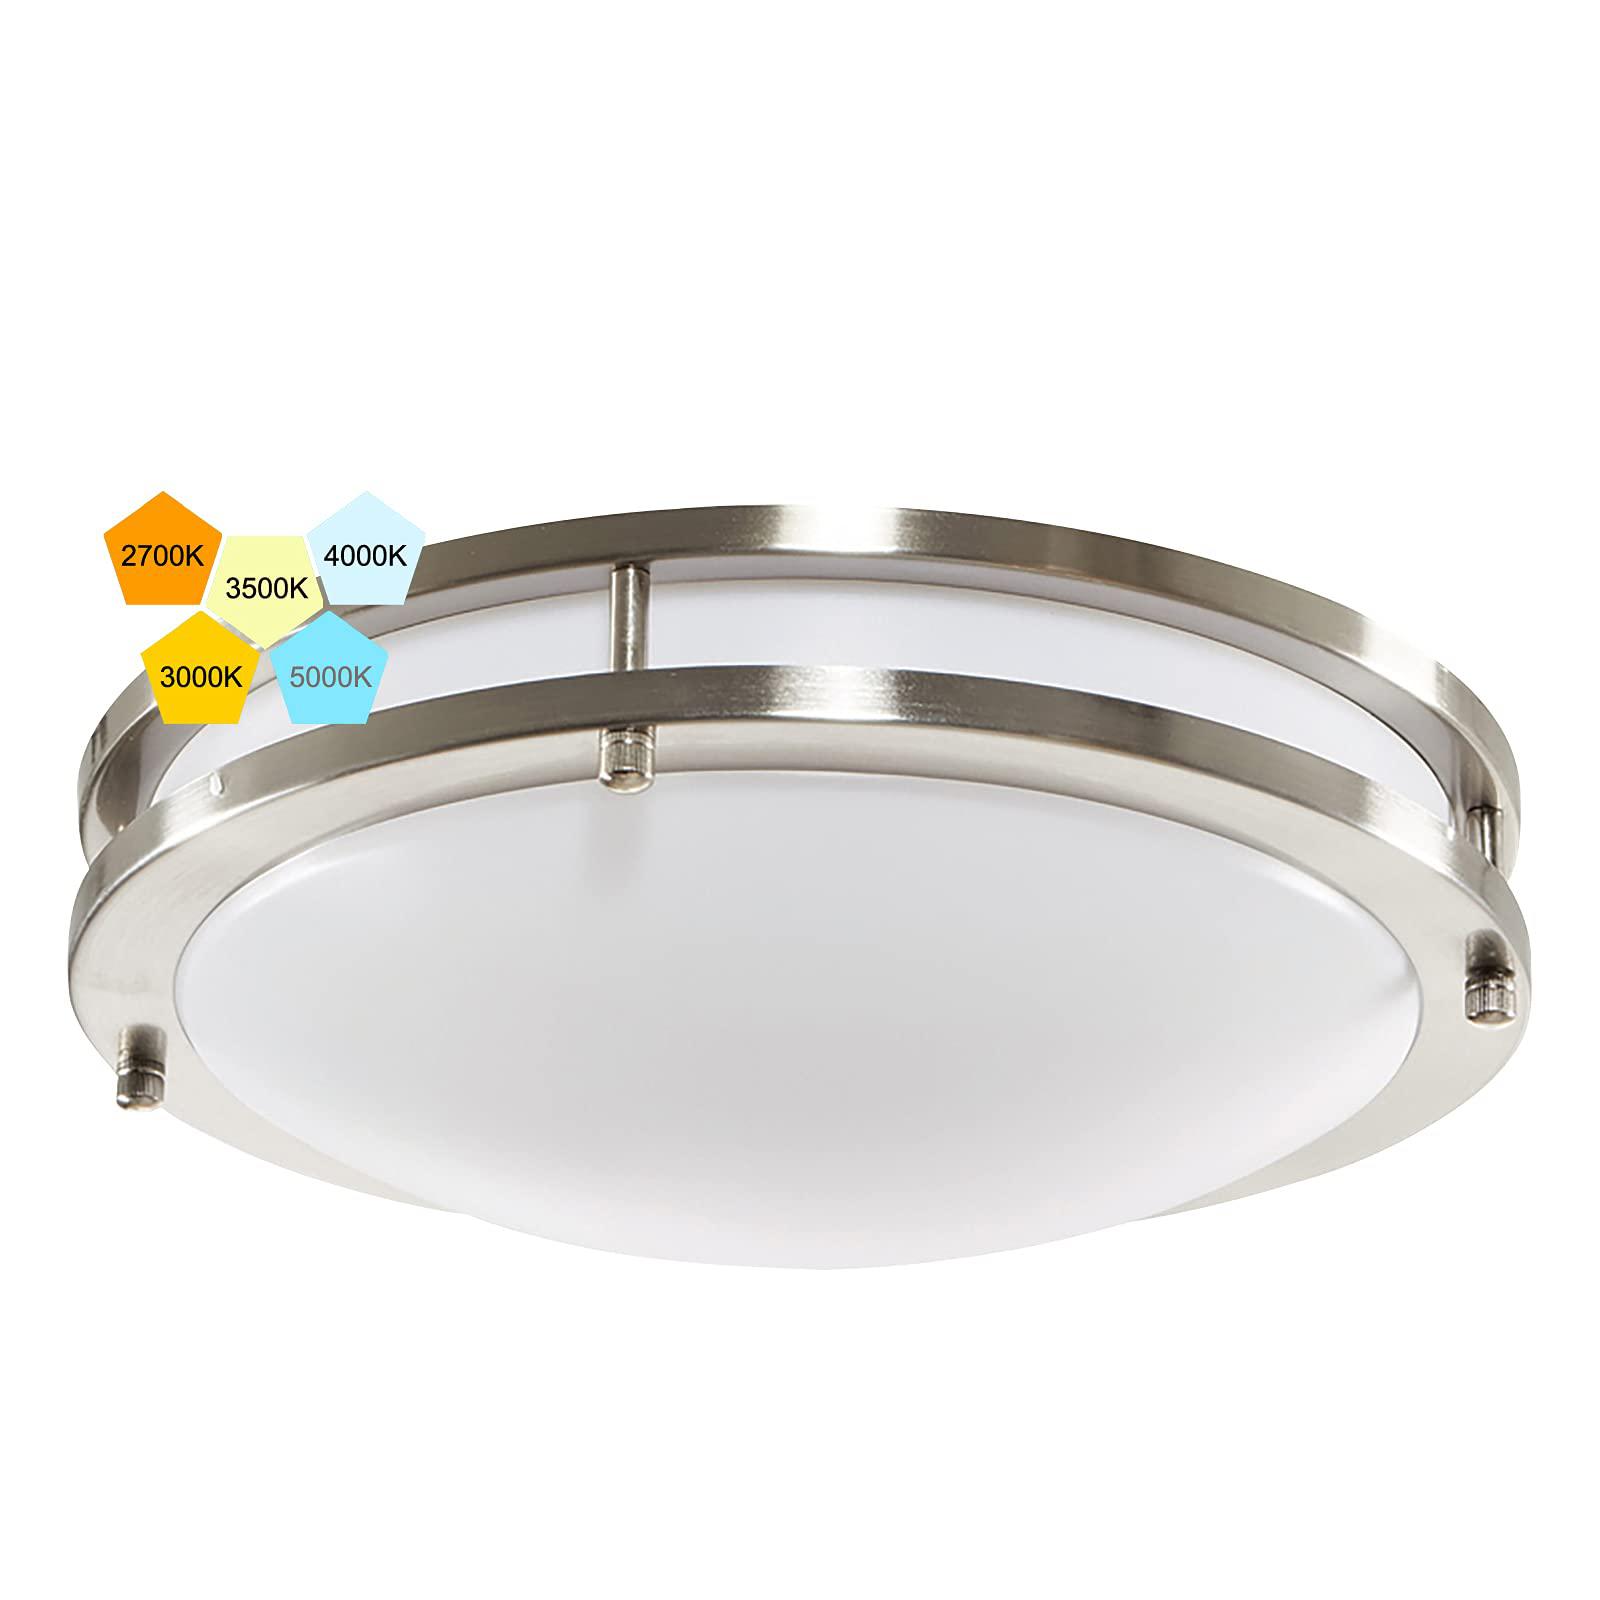 laborate lighting 12 inch, led ceiling light flush mount, dimmable, cct color temperature selectable 2700k | 3000k | 3500k | 